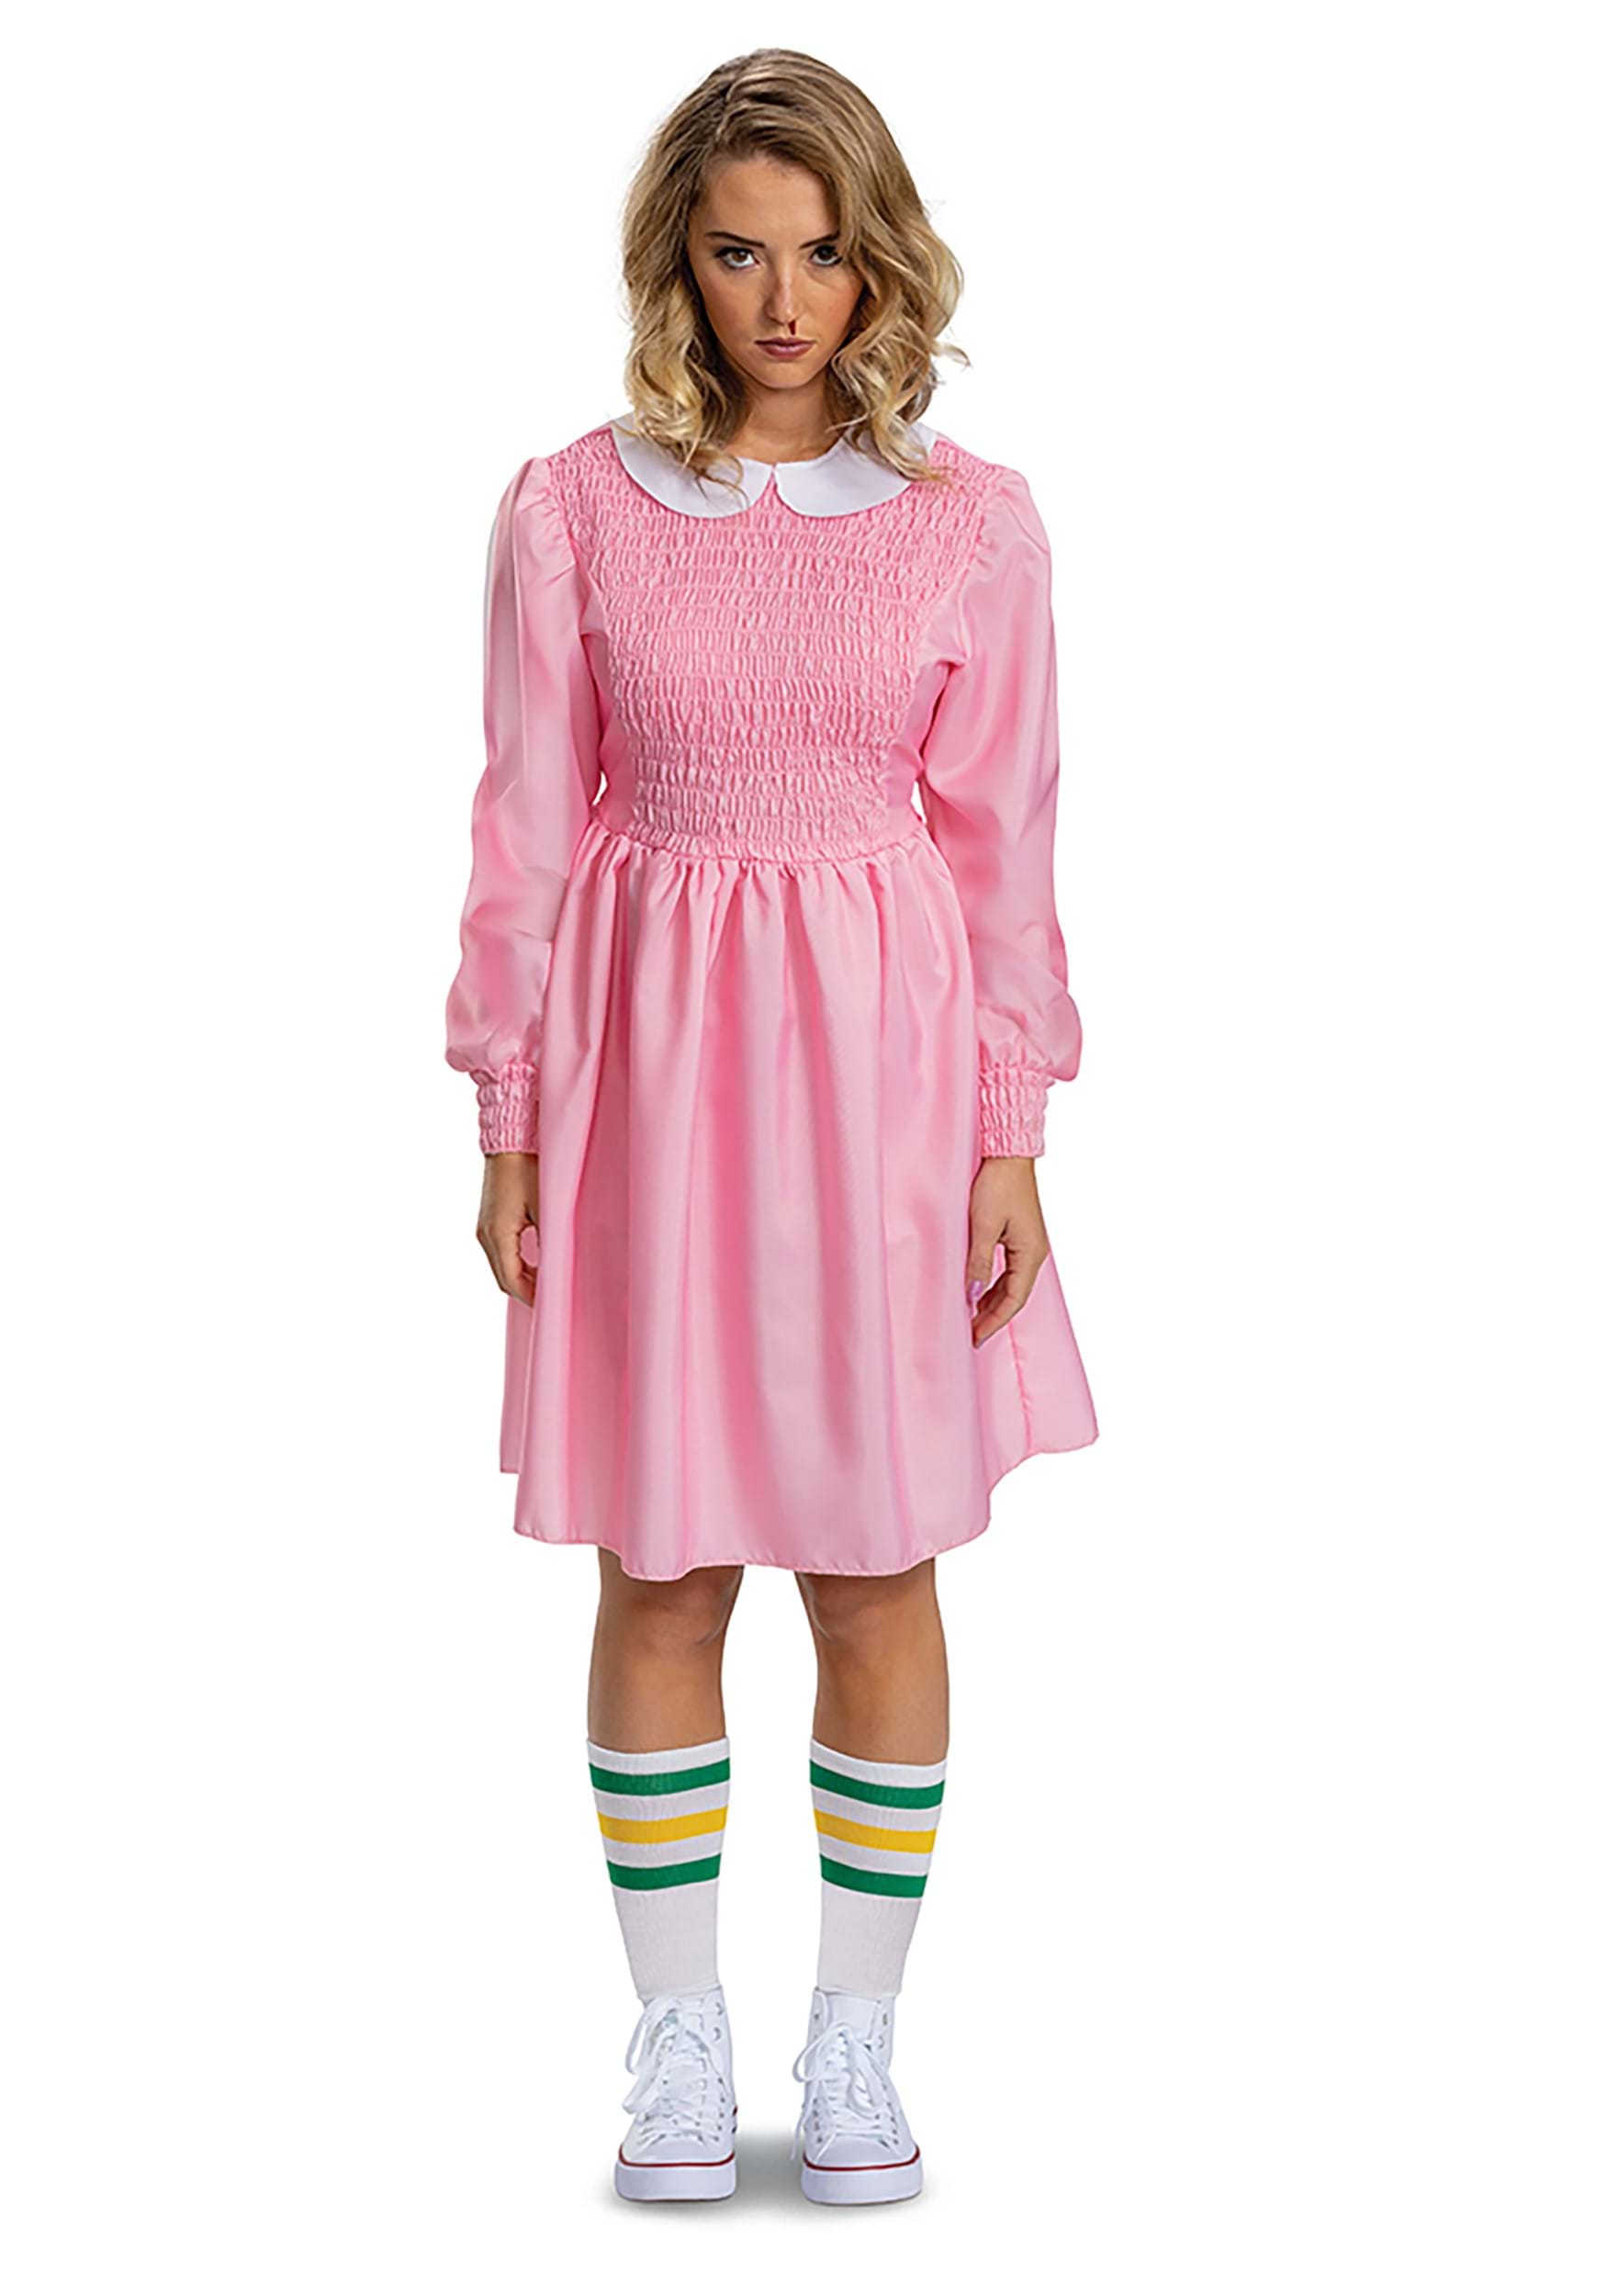 Eleven Women's Stranger Things Adult Deluxe Pink Dress